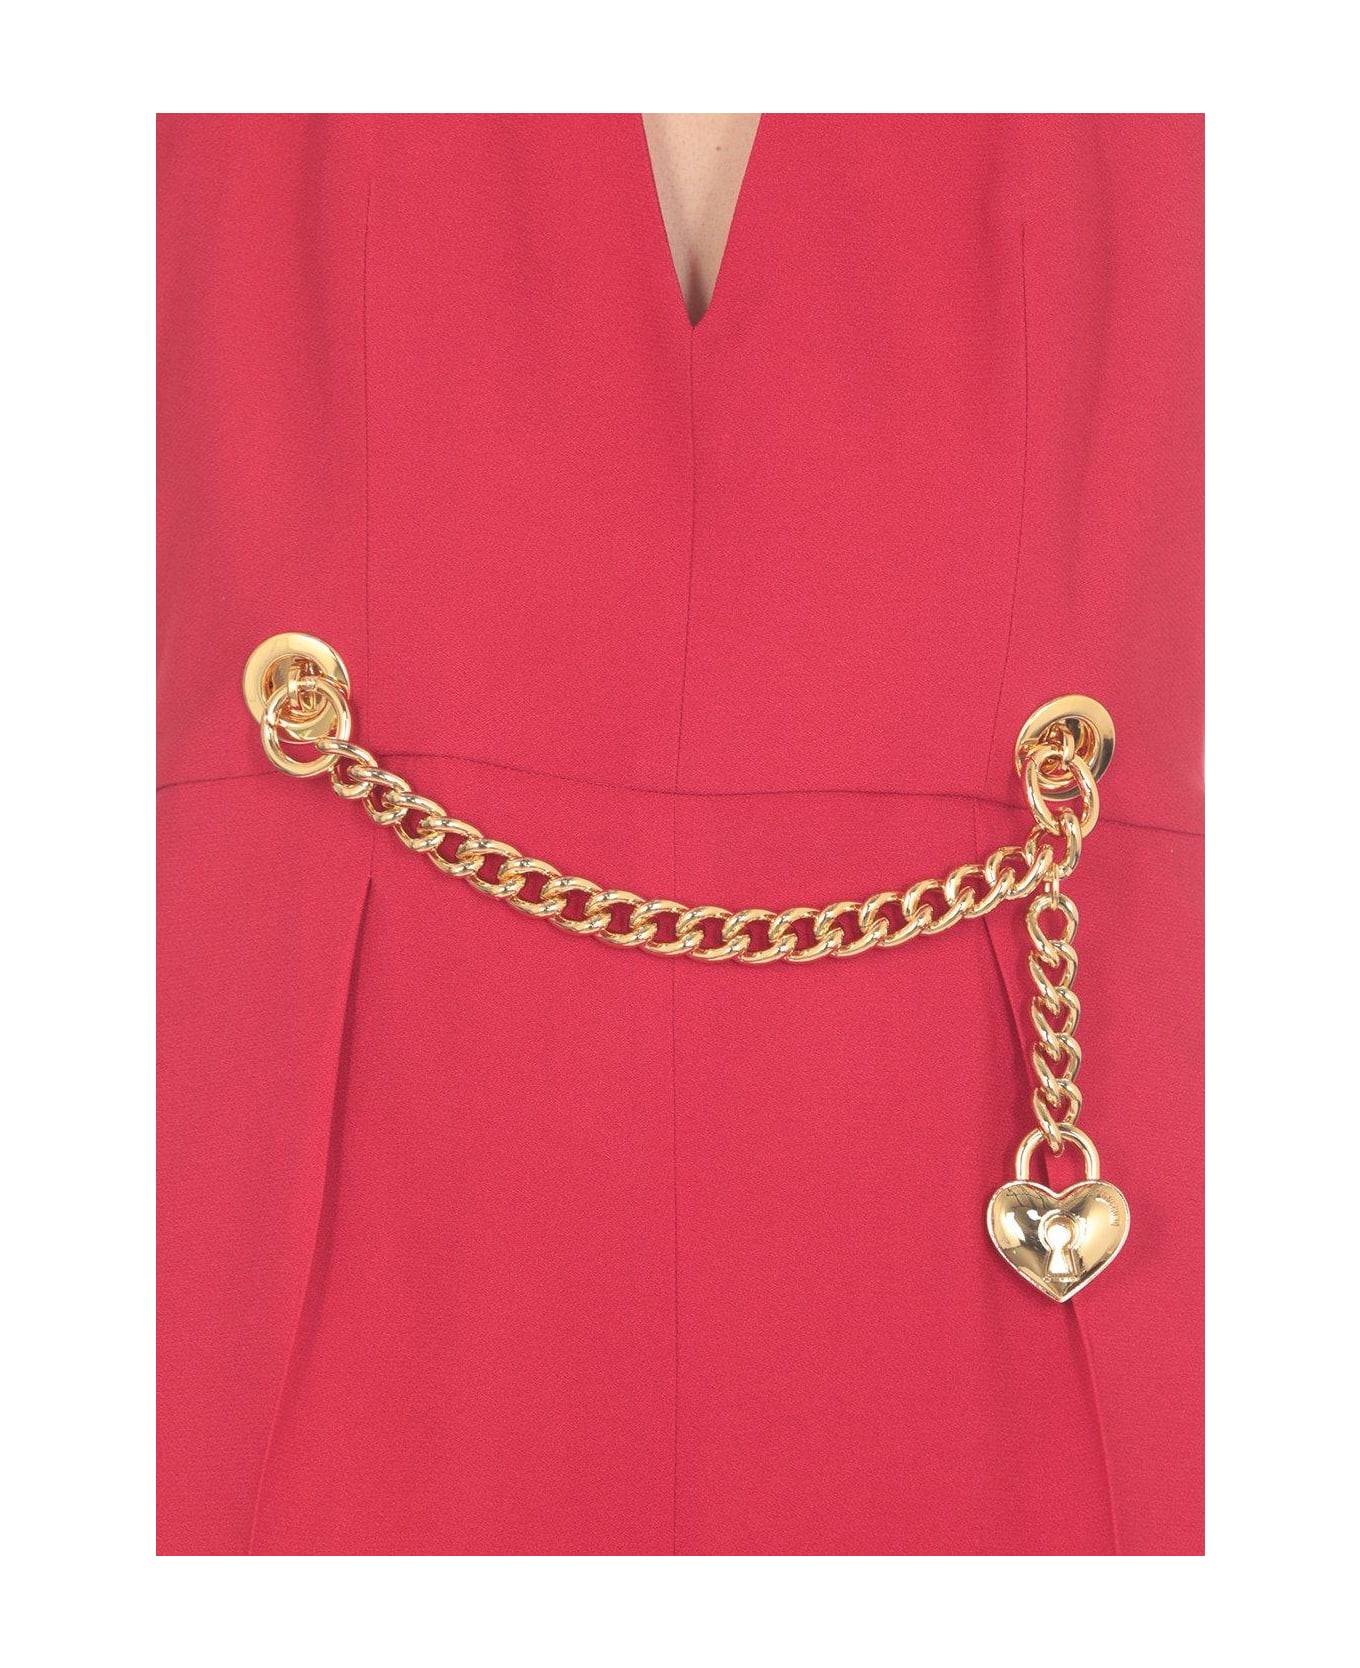 Moschino Chain-embellished Open-back Haltrneck Jumpsuit Moschino - RED